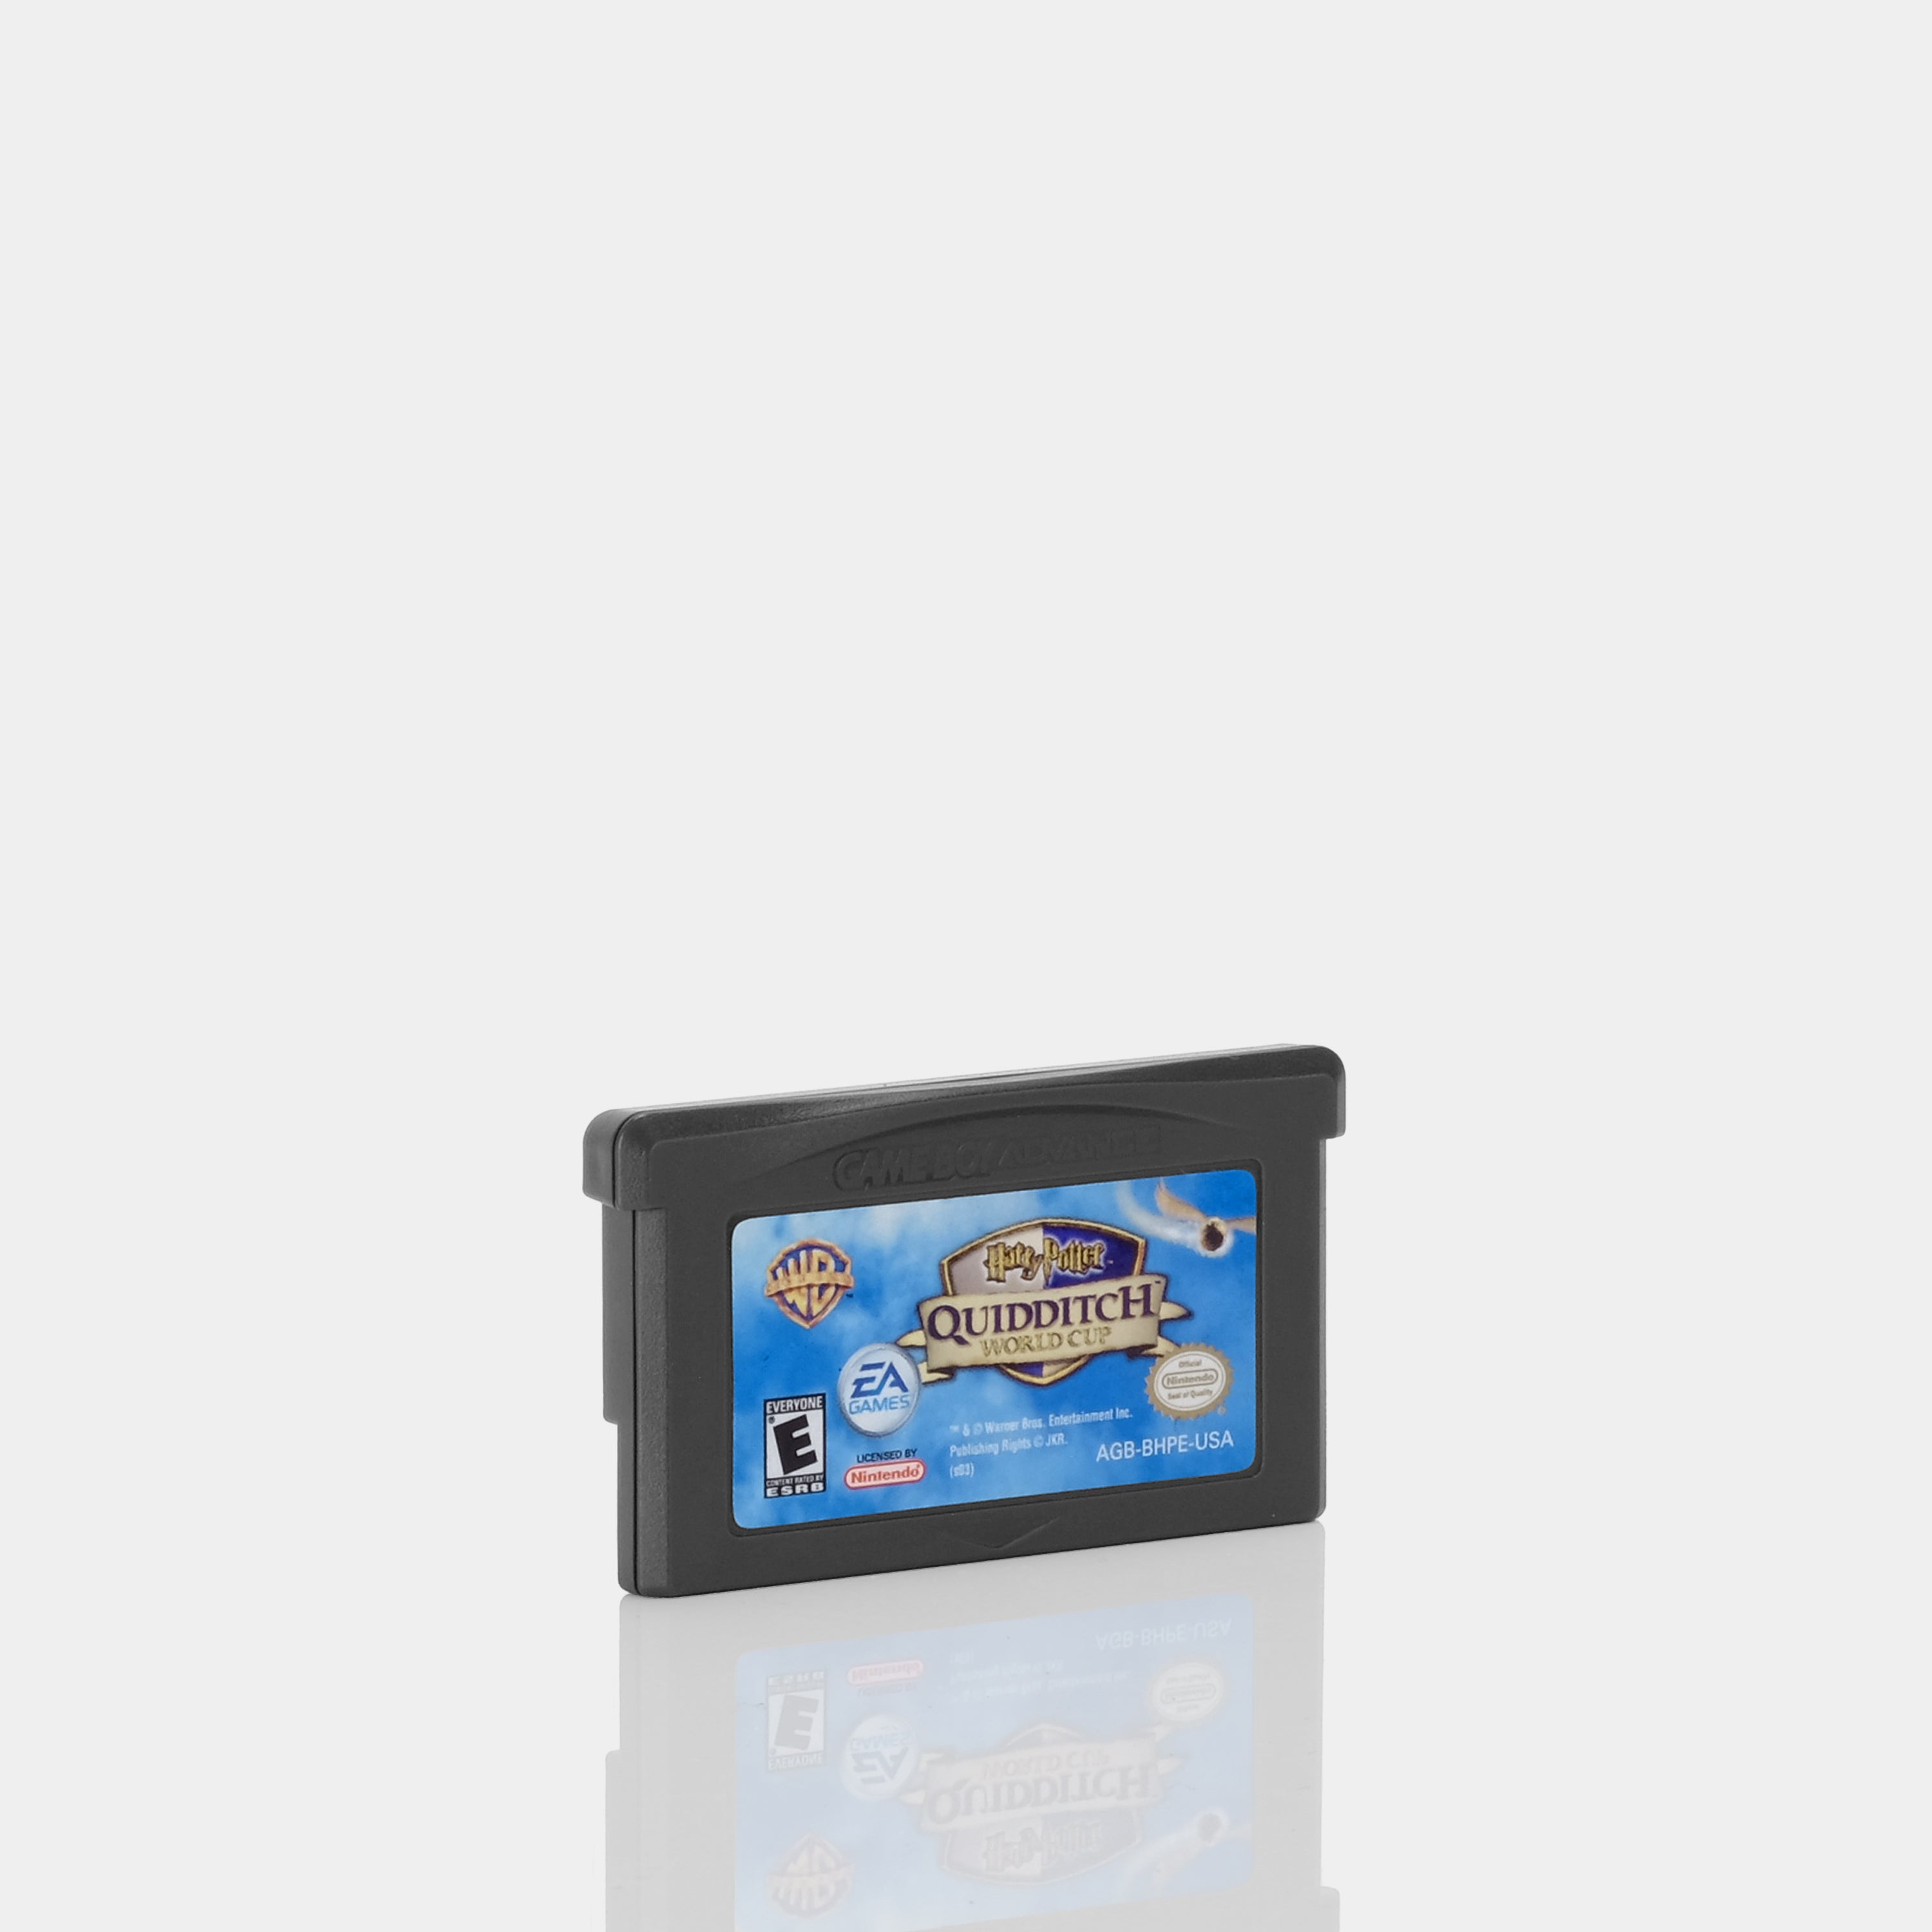 Harry Potter: Quidditch World Cup Game Boy Advance Game